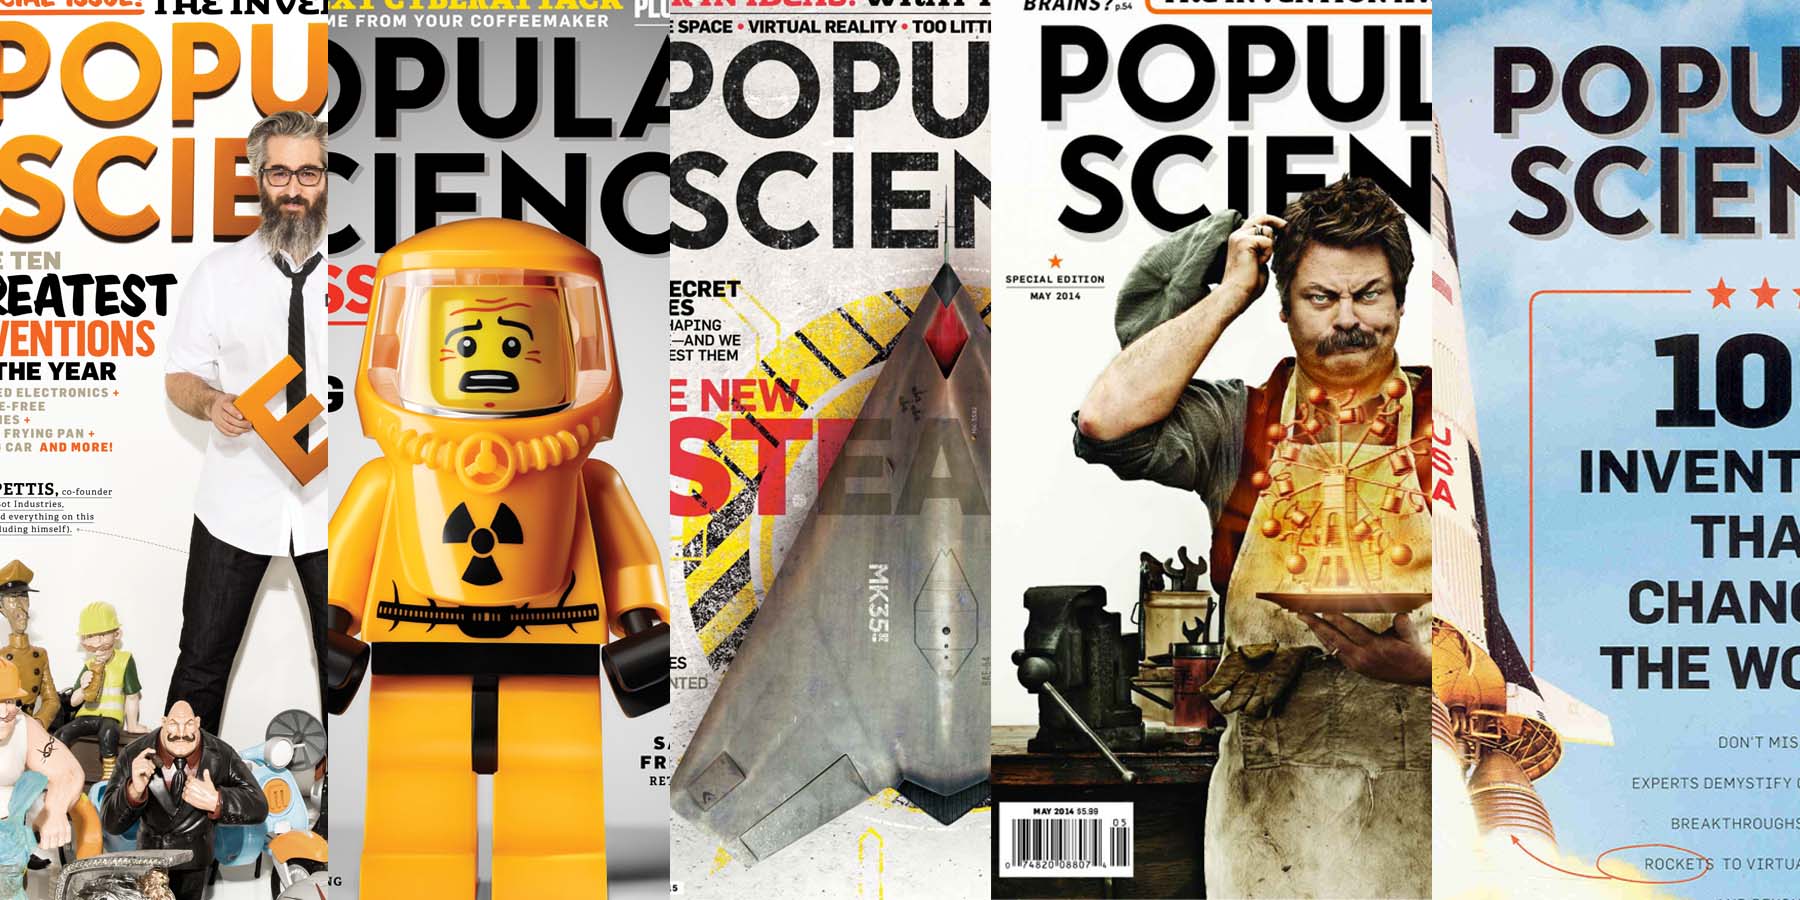 How to Get a Byline in Popular Science